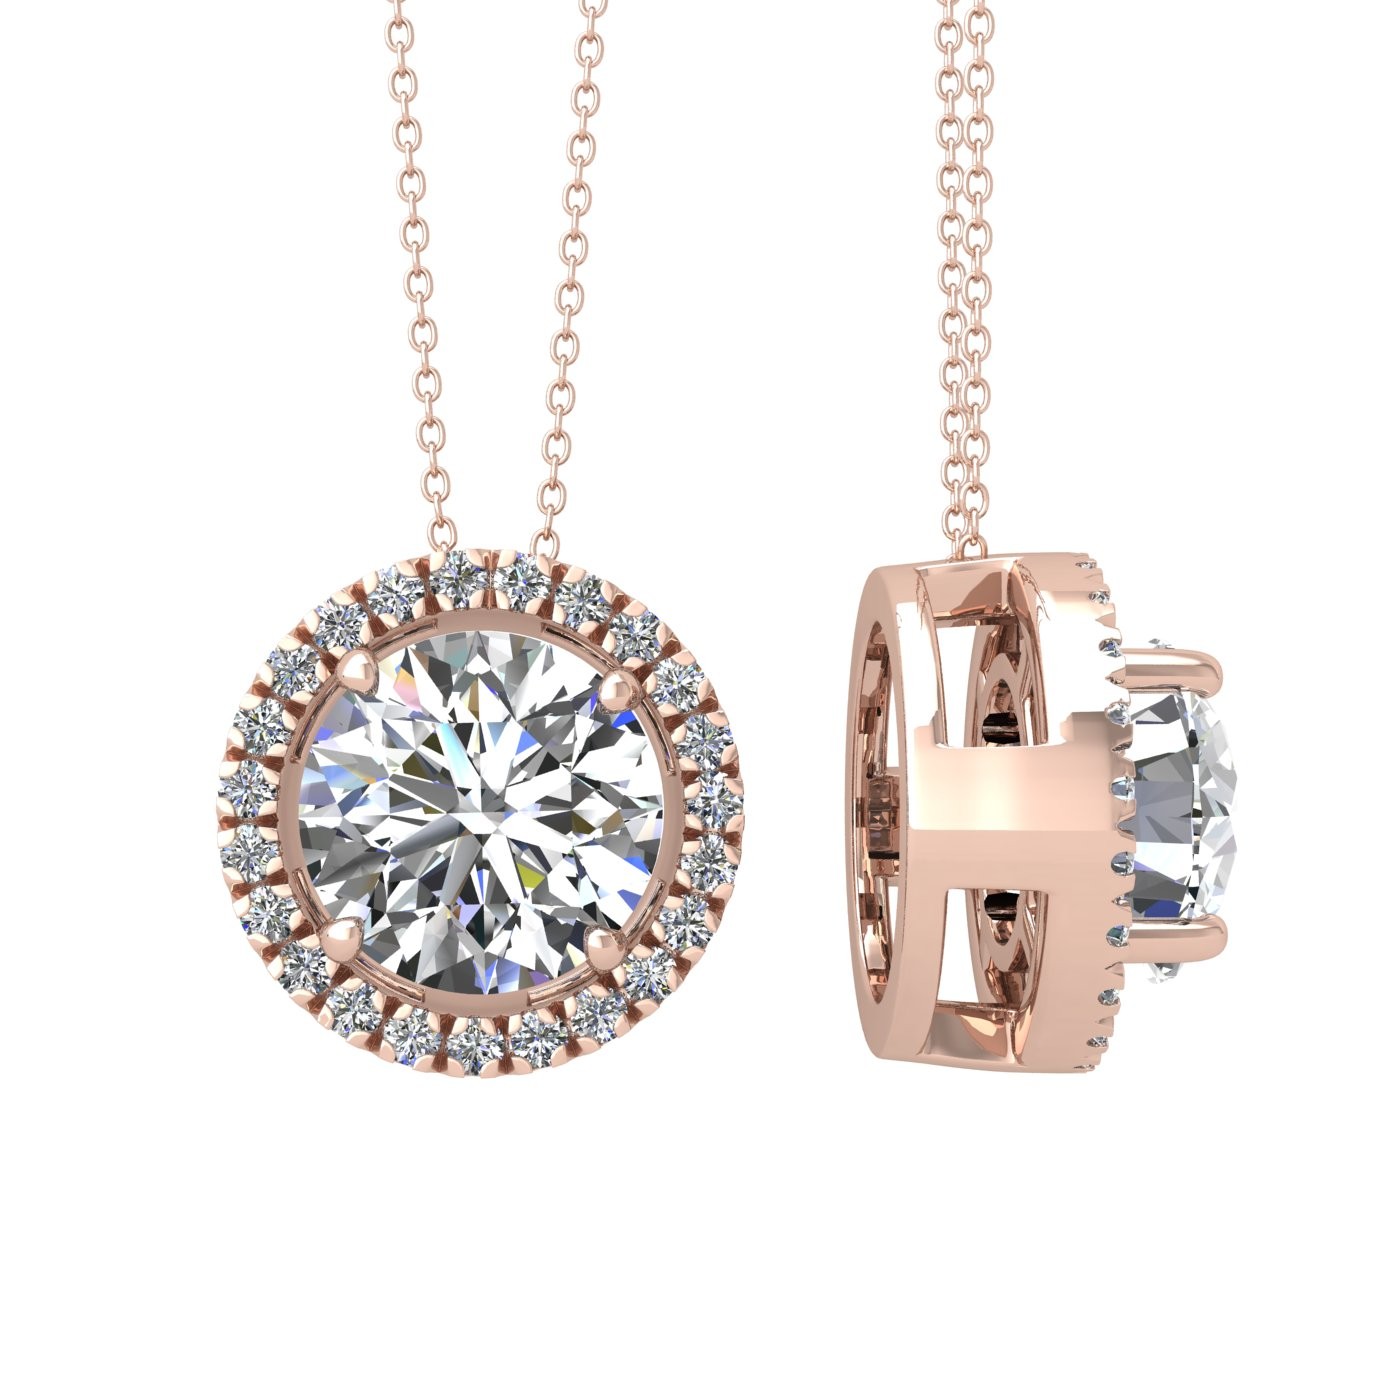 18k rose gold 1,5 ct 4 prong round shape diamond pendant with diamond pavÉ set halo including chain seperate from the pendant Photos & images